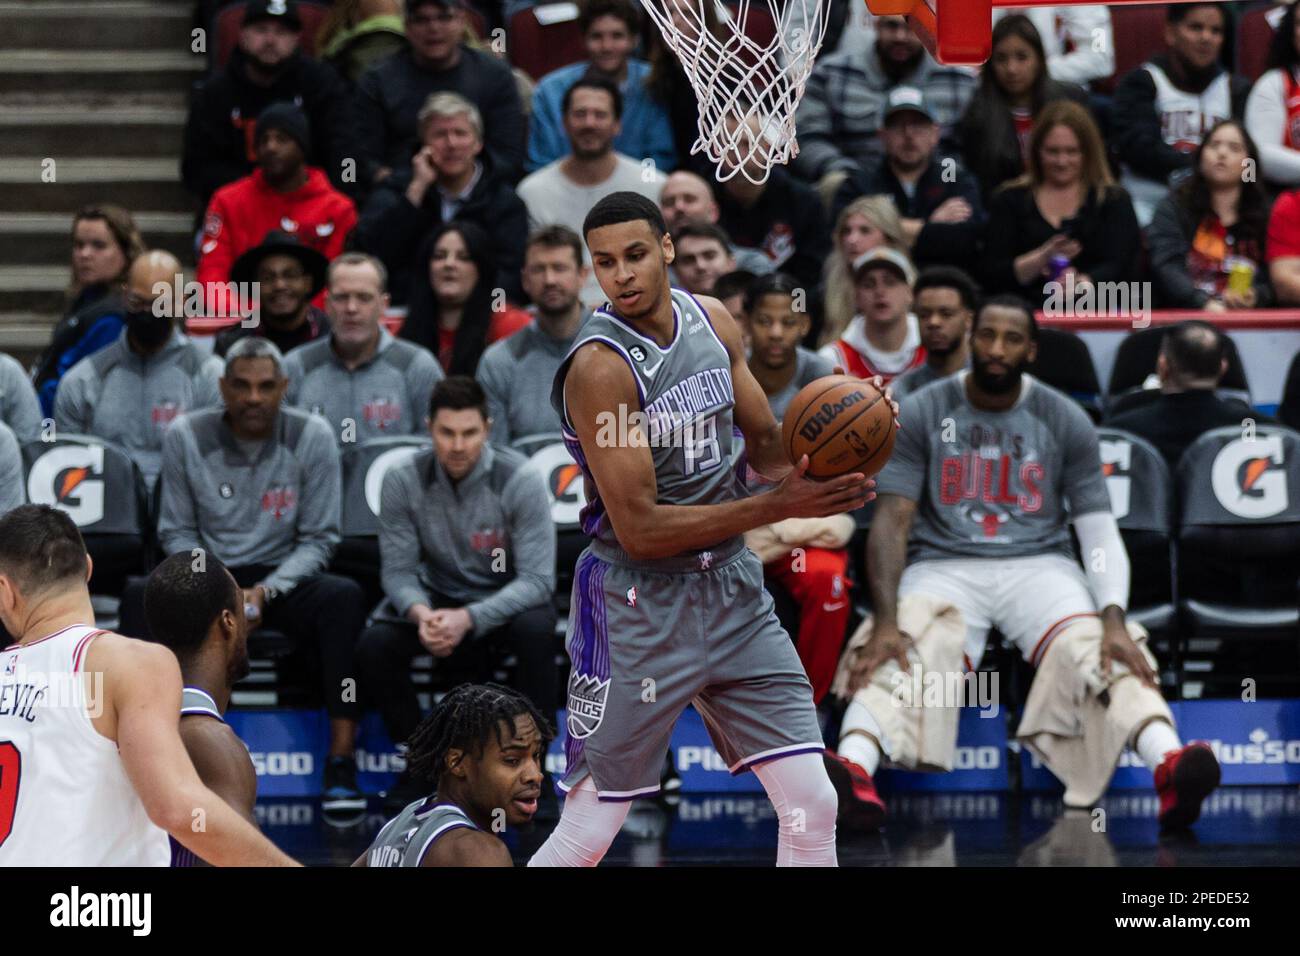 Chicago, USA. 15th Mar, 2023. Chicago, USA, March 15, 2023: Keegan Murray (12 Sacramento Kings) grabs the rebound during the game between the Chicago Bulls and Sacramento Kings on Wednesday March 15, 2023 at the United Center, Chicago, USA. (NO COMMERCIAL USAGE) (Shaina Benhiyoun/SPP) Credit: SPP Sport Press Photo. /Alamy Live News Stock Photo